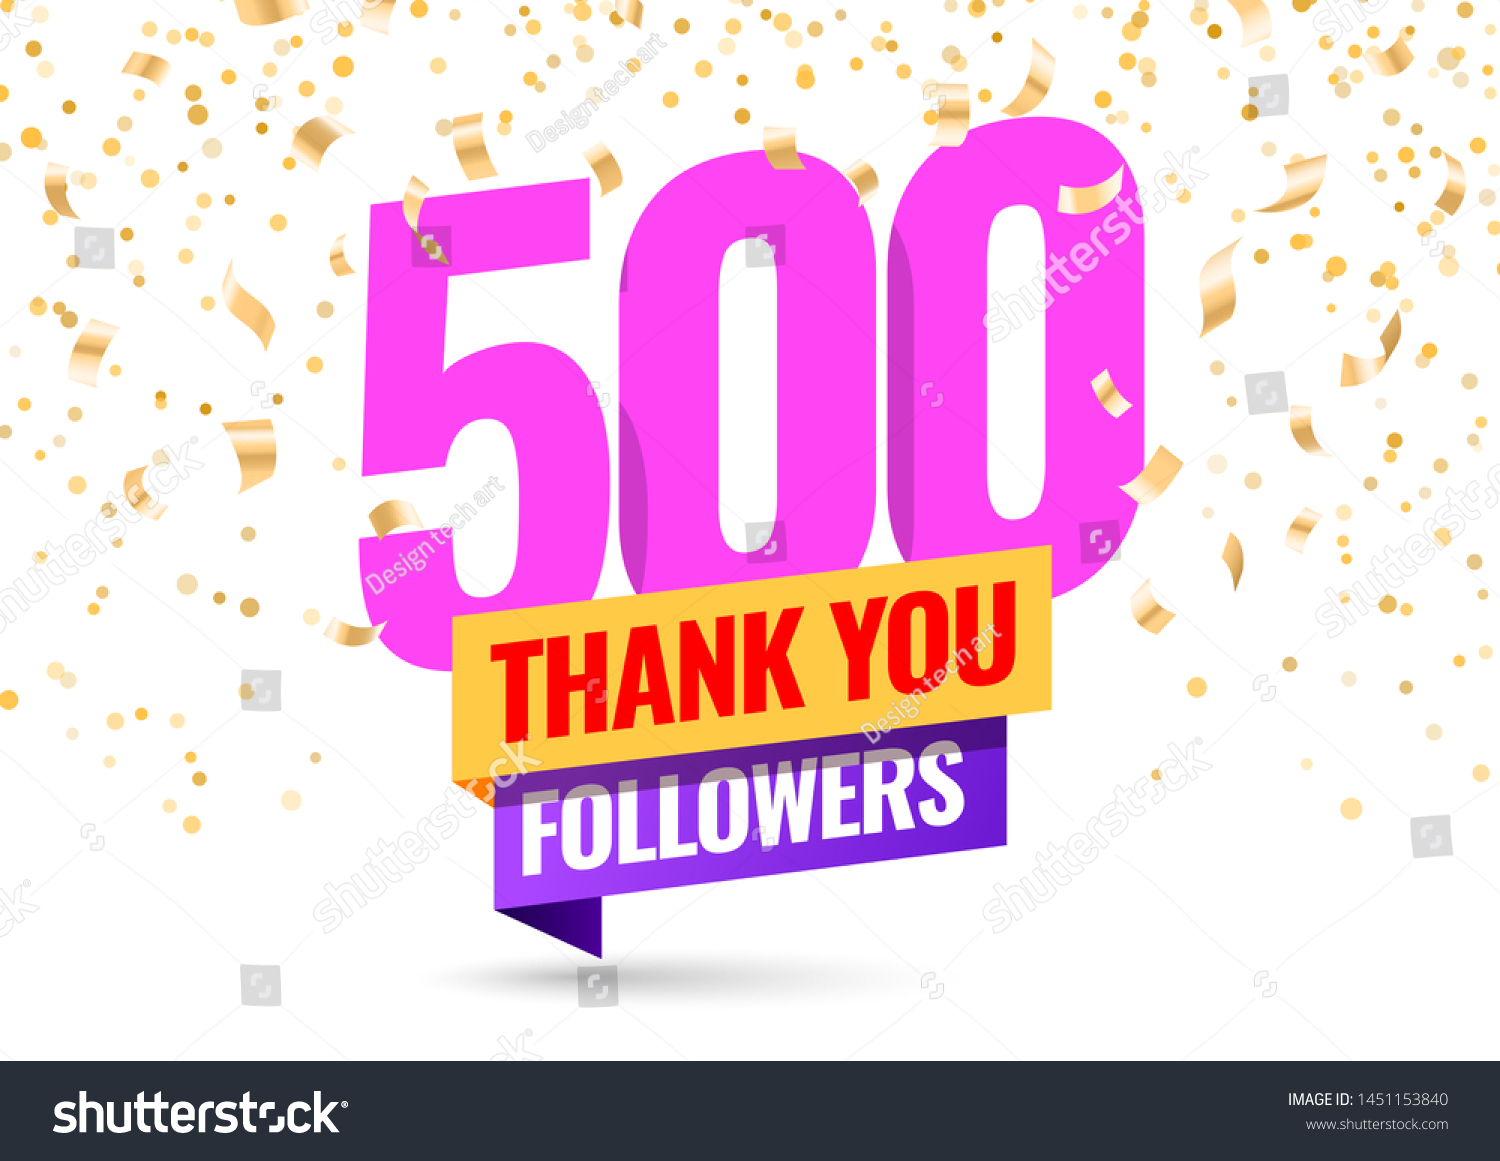 Celebrating the events of five thousand subscribers. Thank you 500 followers. Thanks followers Poster template for Social Networks. large number of subscribers. Vector illustration #1451153840